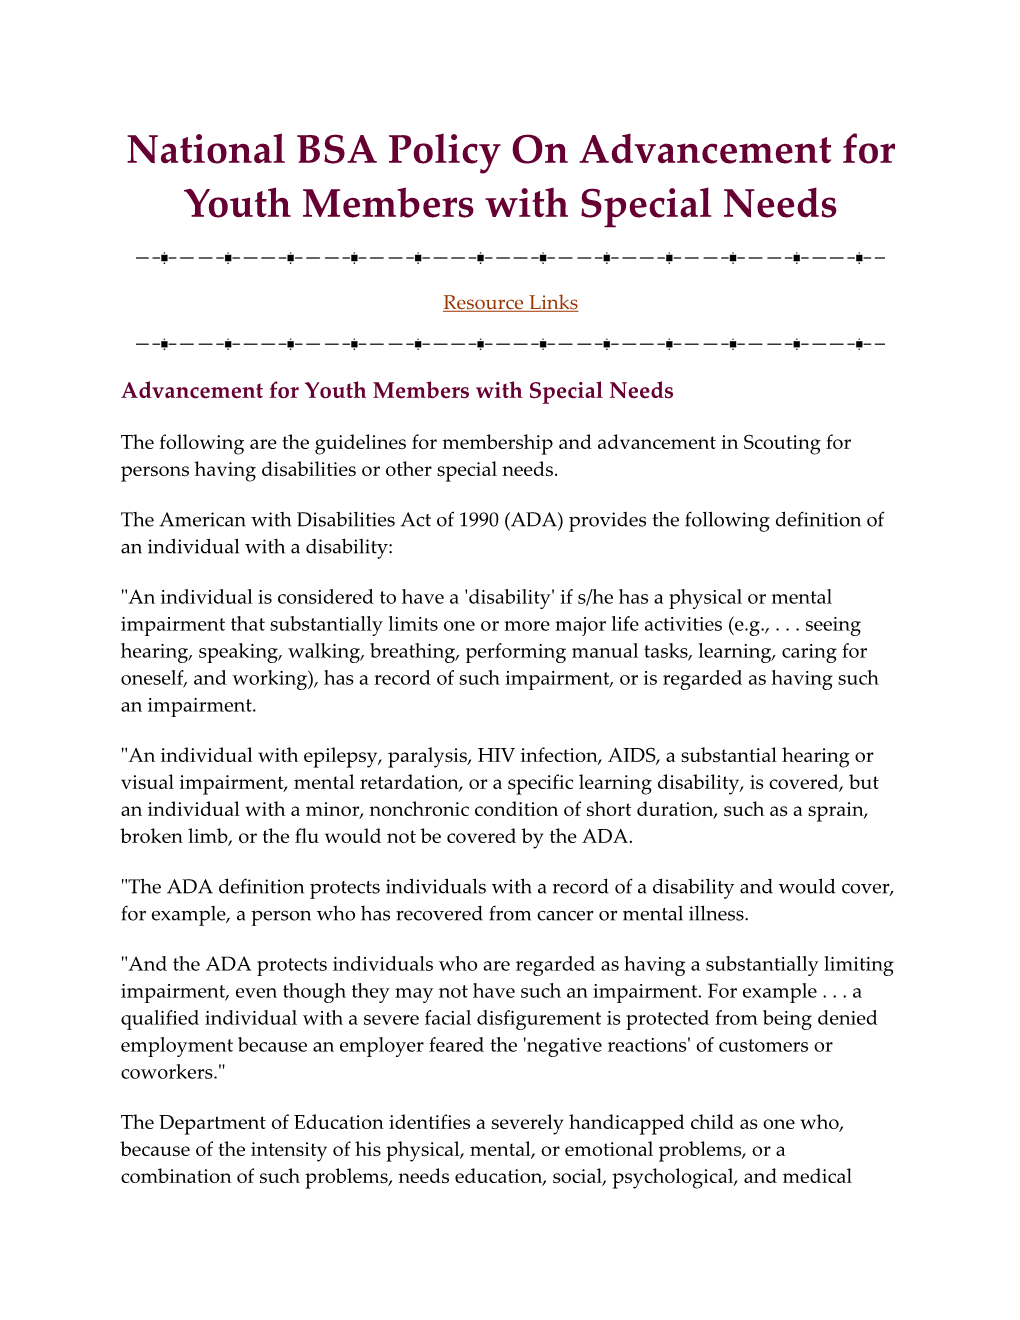 National BSA Policy on Advancement for Youth Members with Special Needs